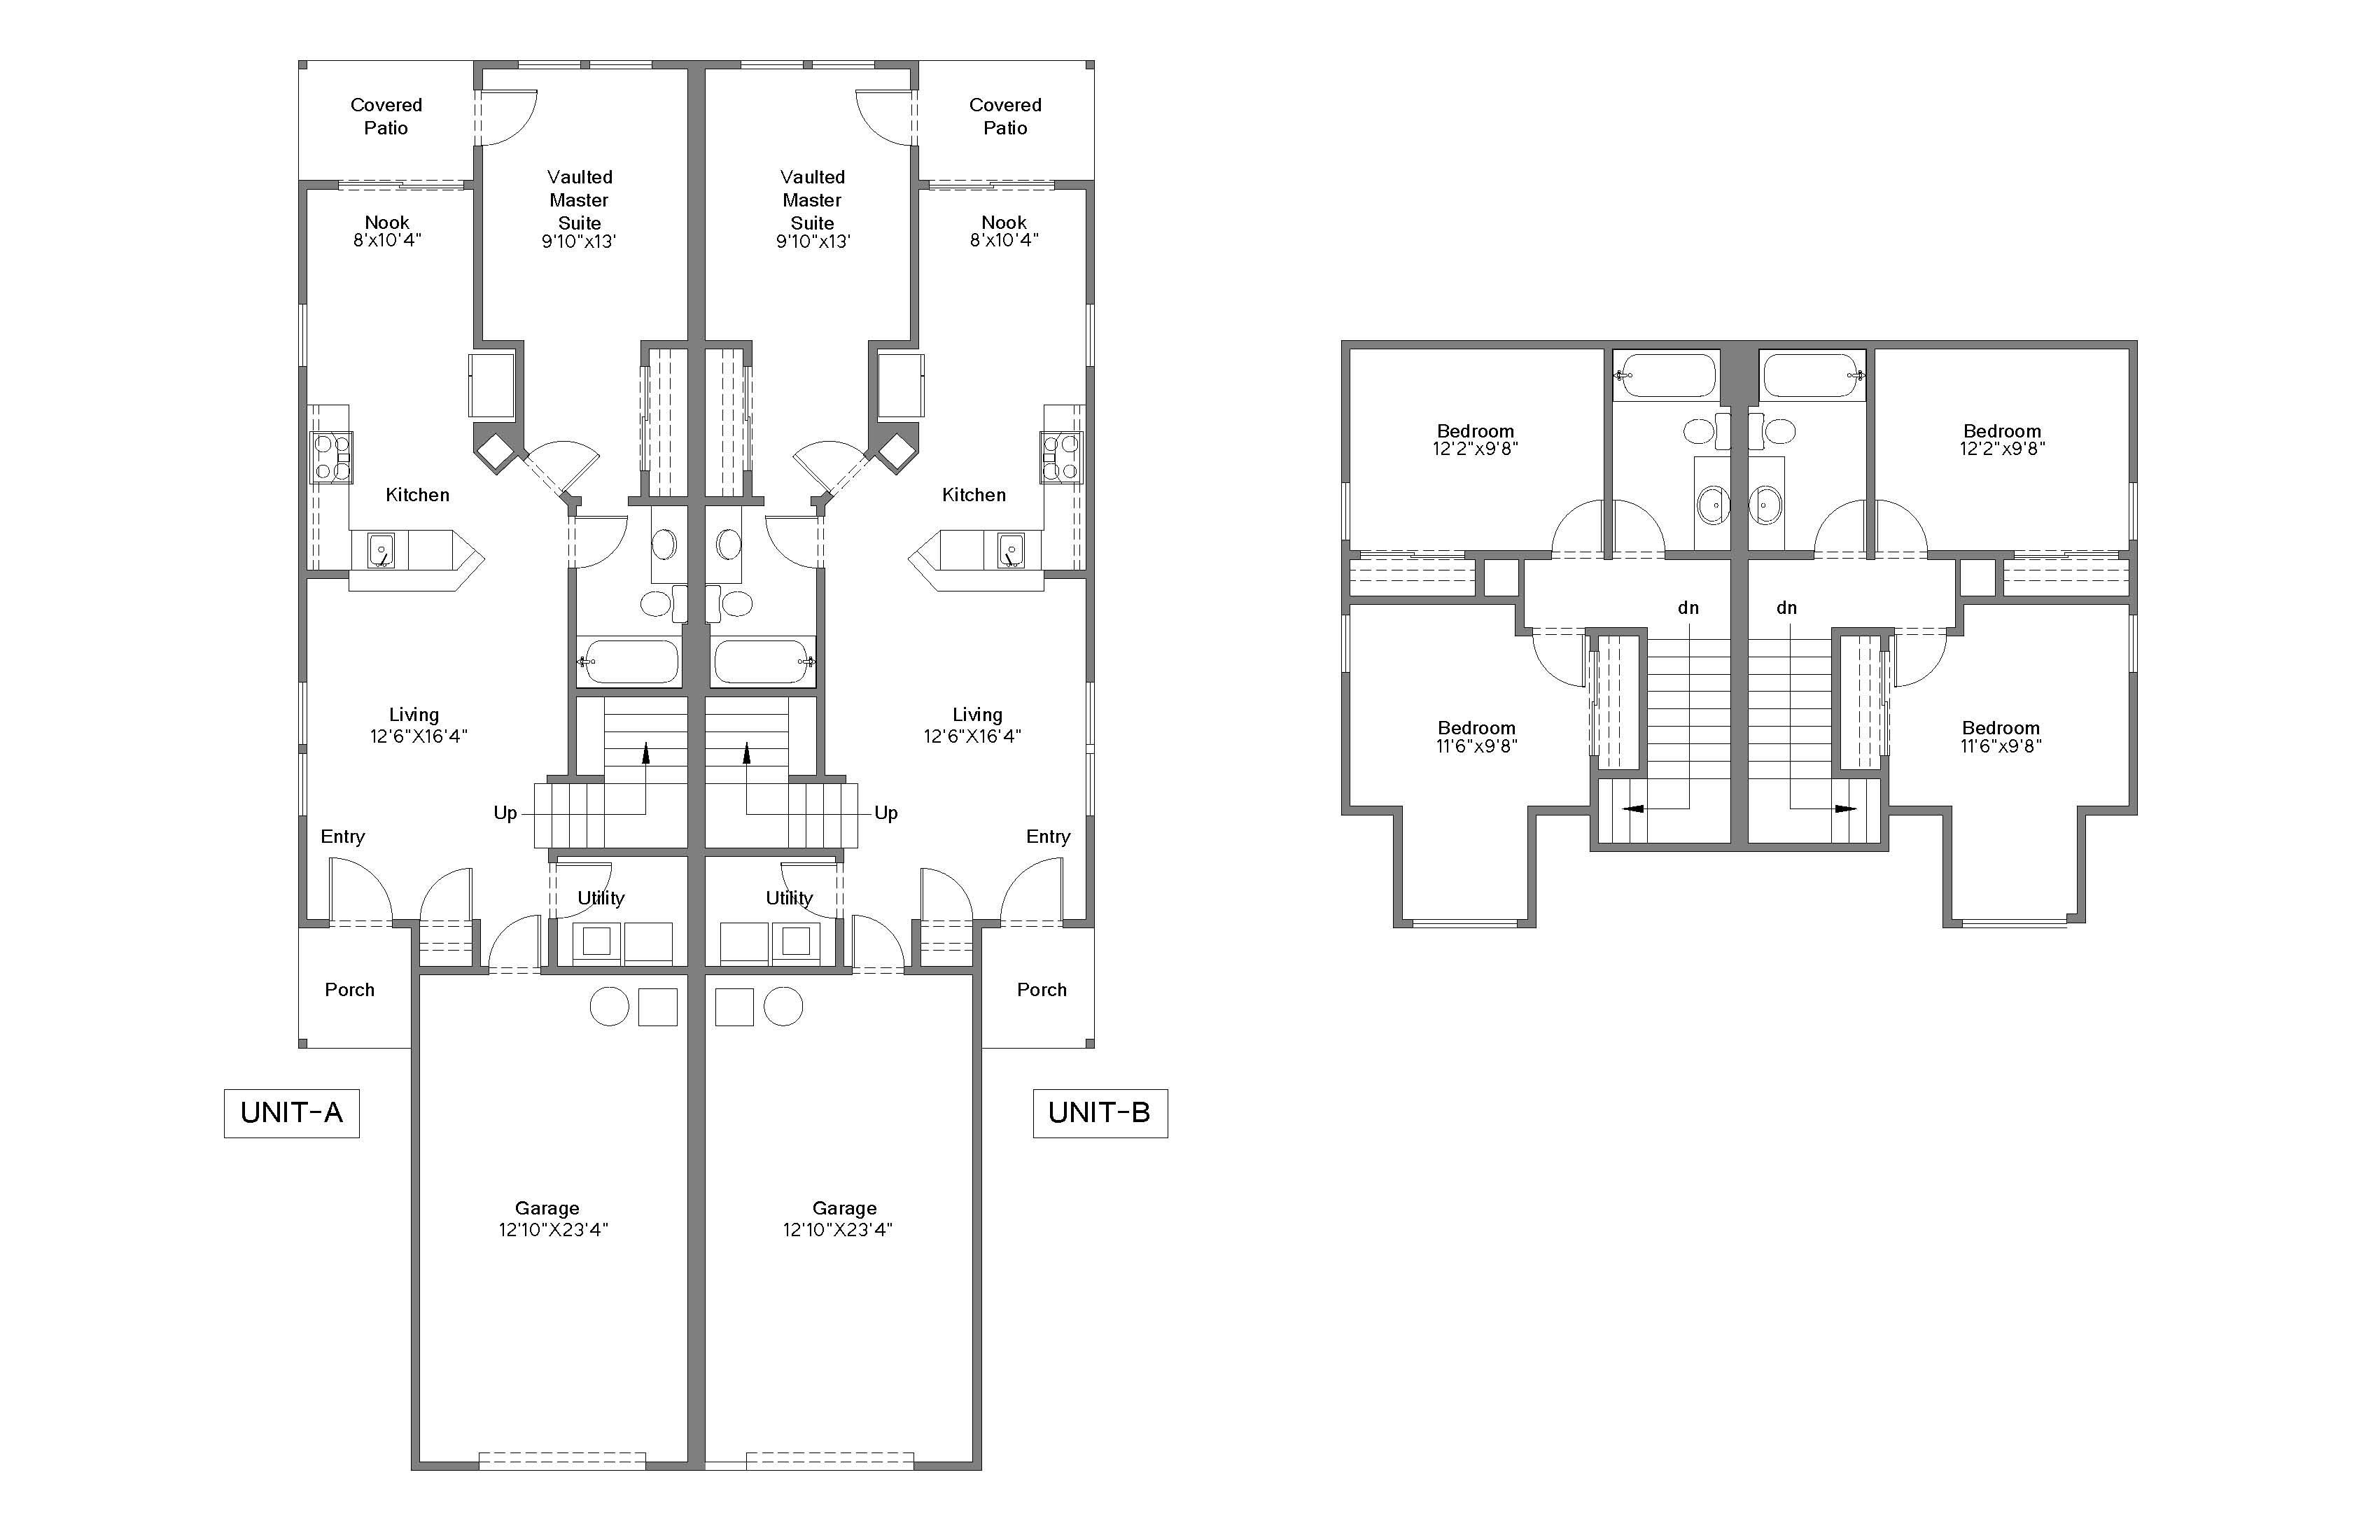 Architectural Floor Plan, Floor Plan With Autocad Drawings